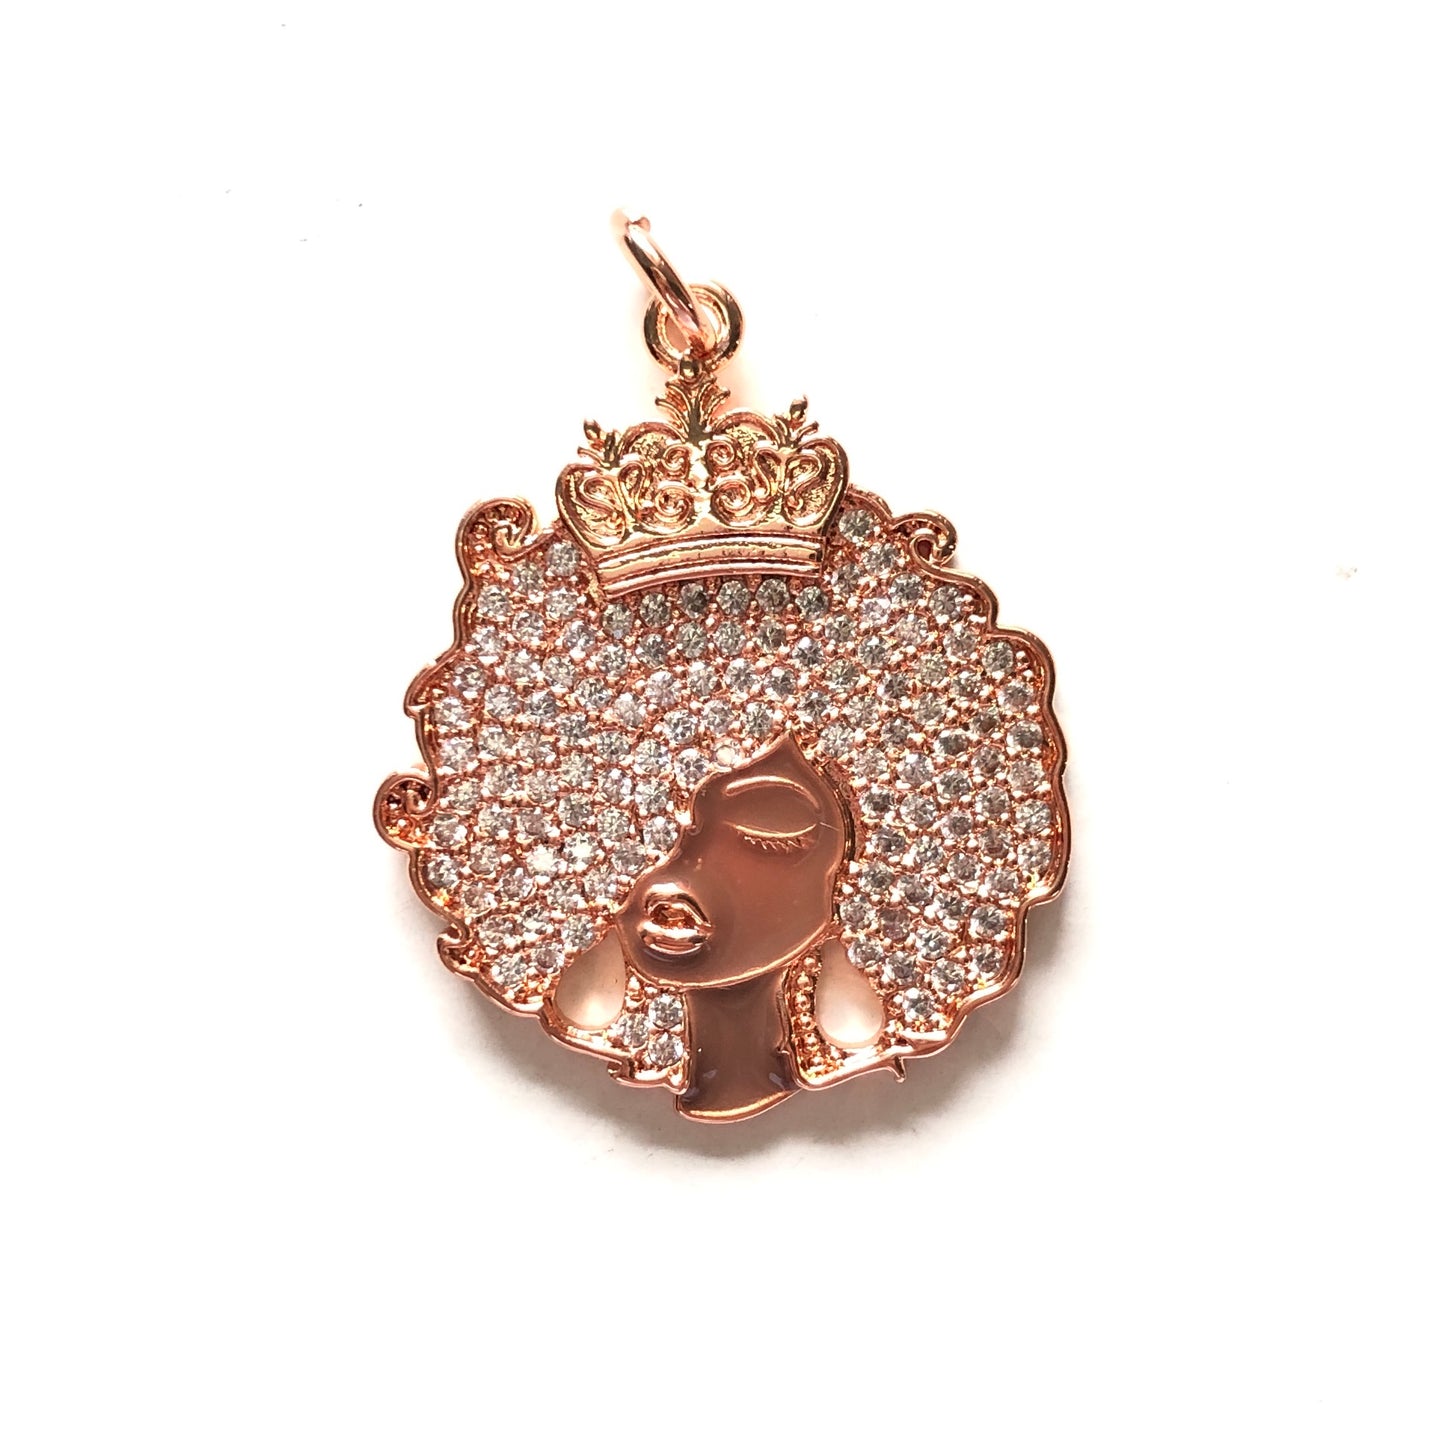 10pcs/lot 31.6*26mm CZ Afro Girl Black Queen Charm Pendants Rose Gold CZ Paved Charms Afro Girl/Queen Charms On Sale Charms Beads Beyond